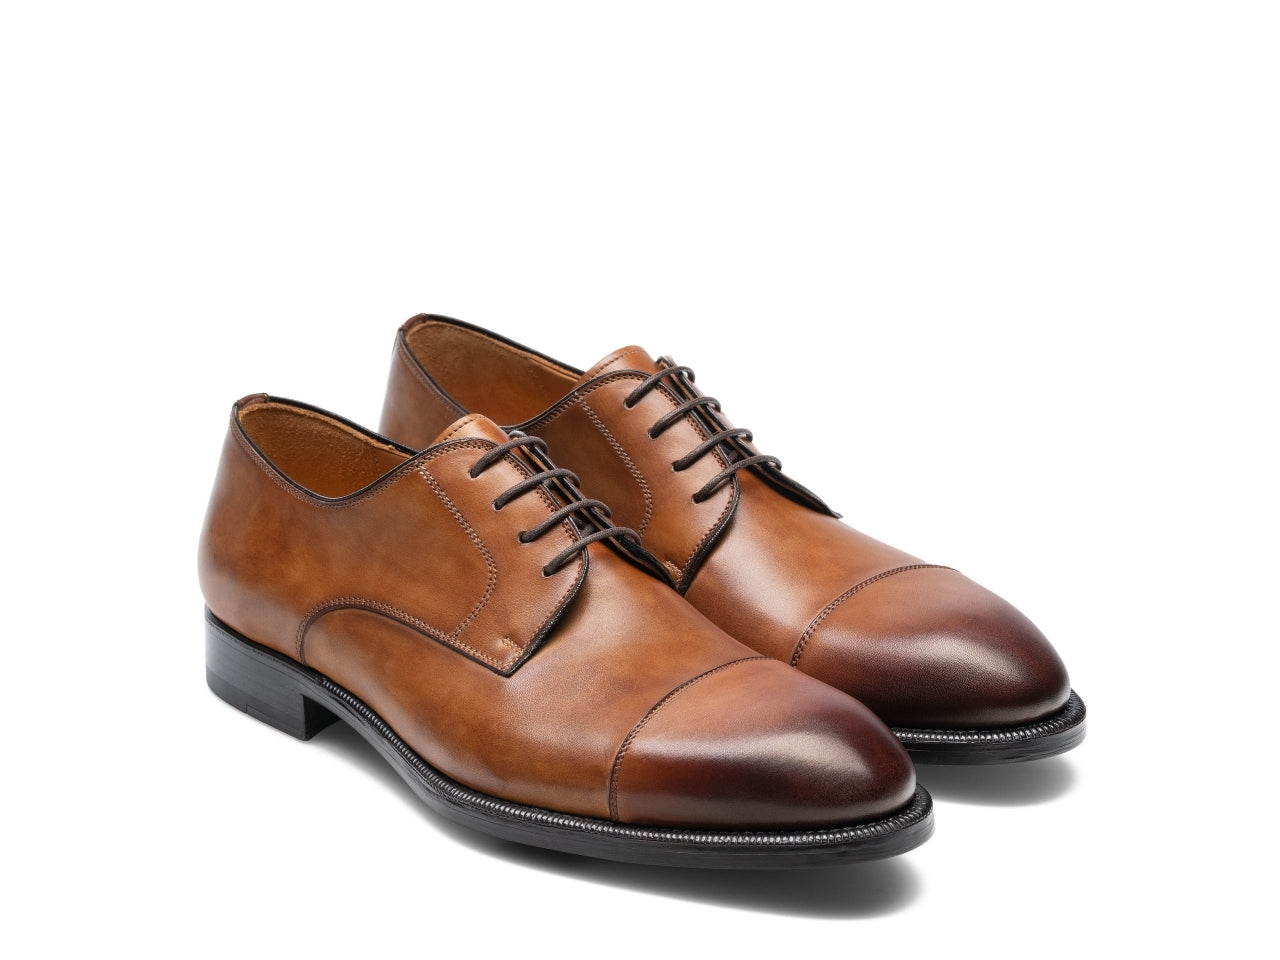  Magnanni Shoes NYC